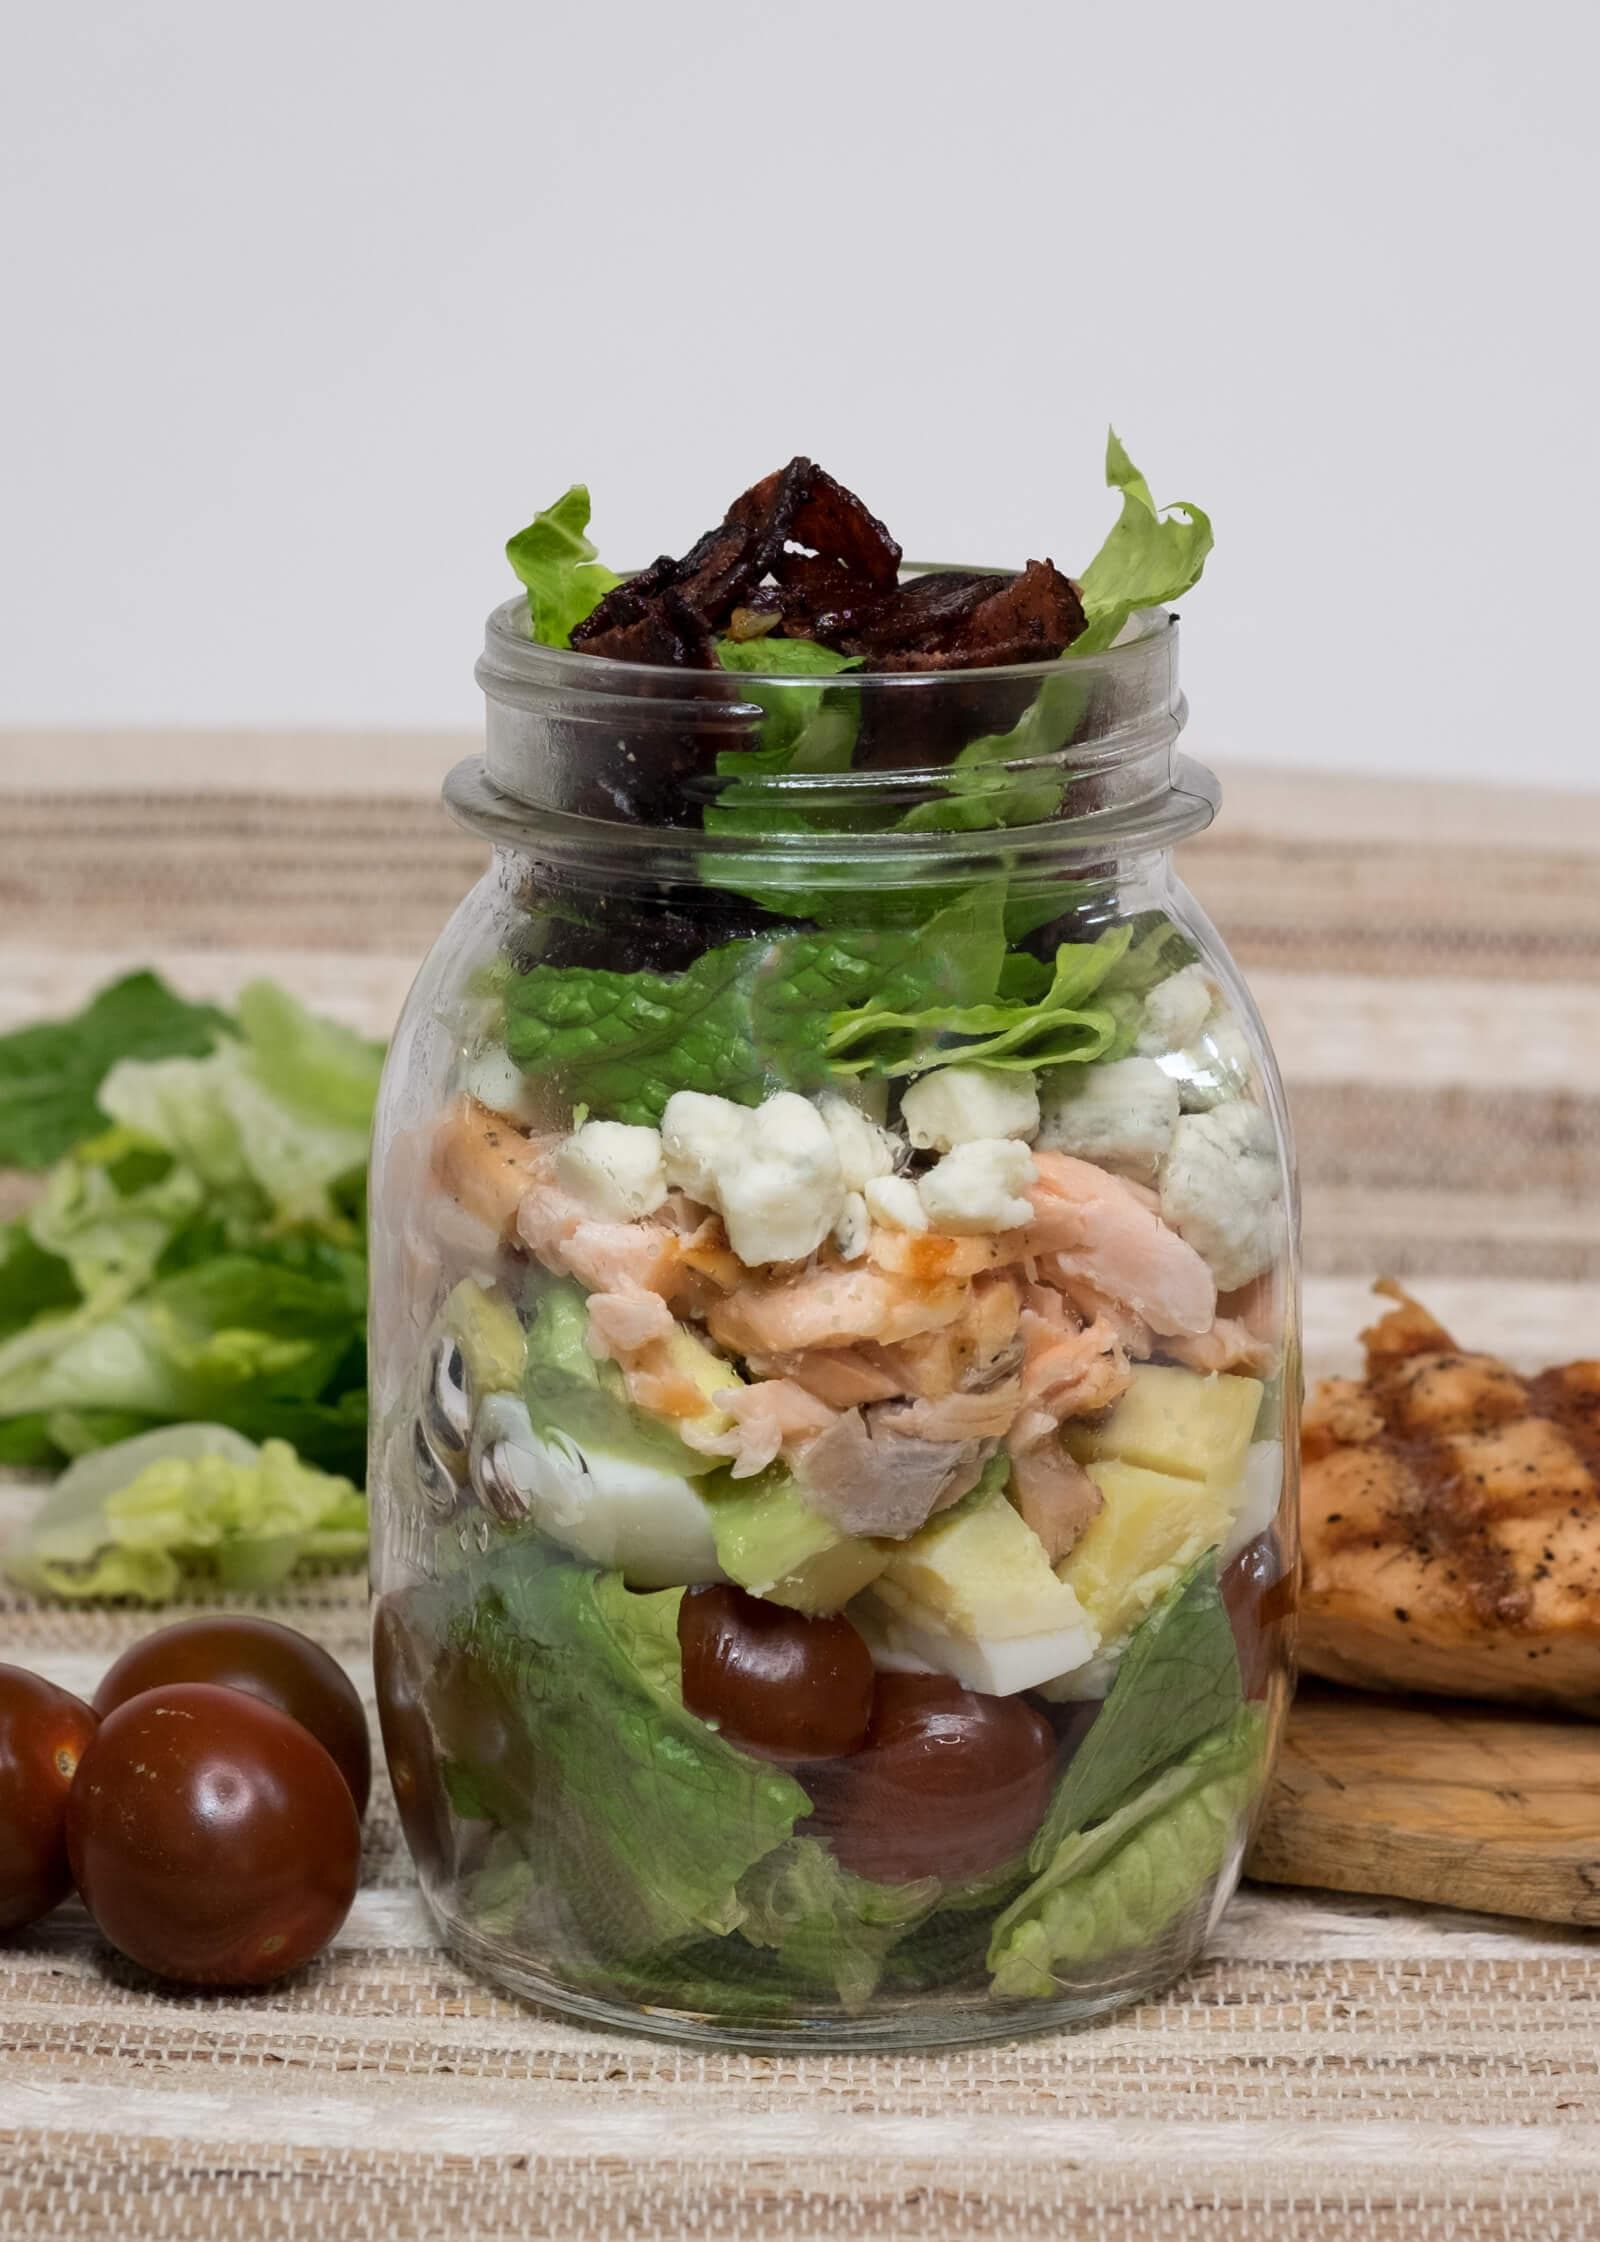 Product photo of a meal in a jar